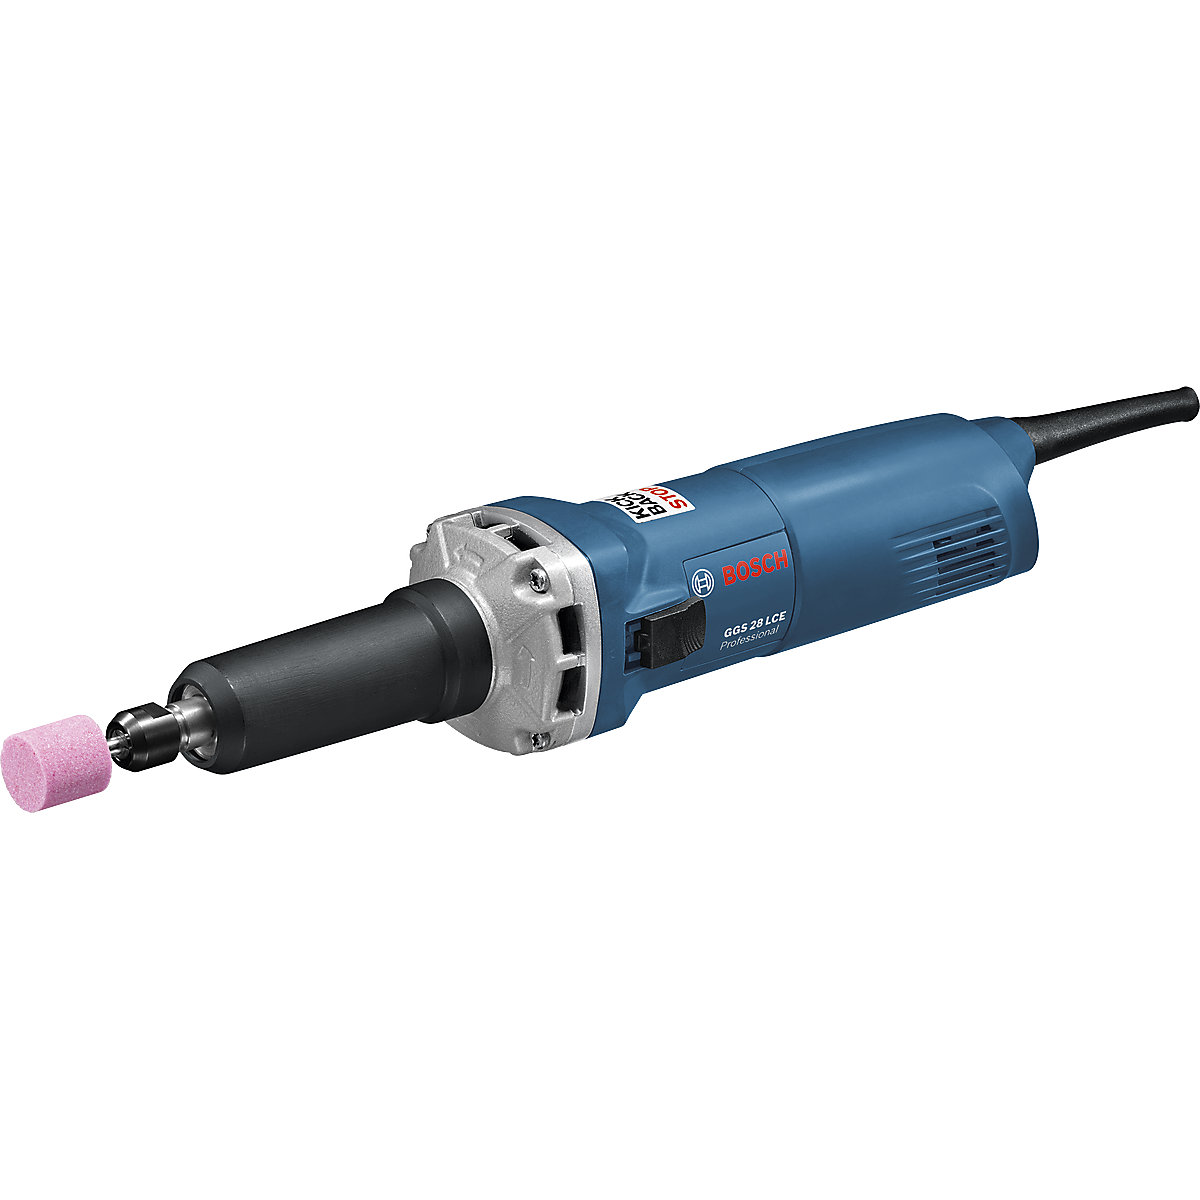 GGS 28 LCE Professional straight grinder - Bosch